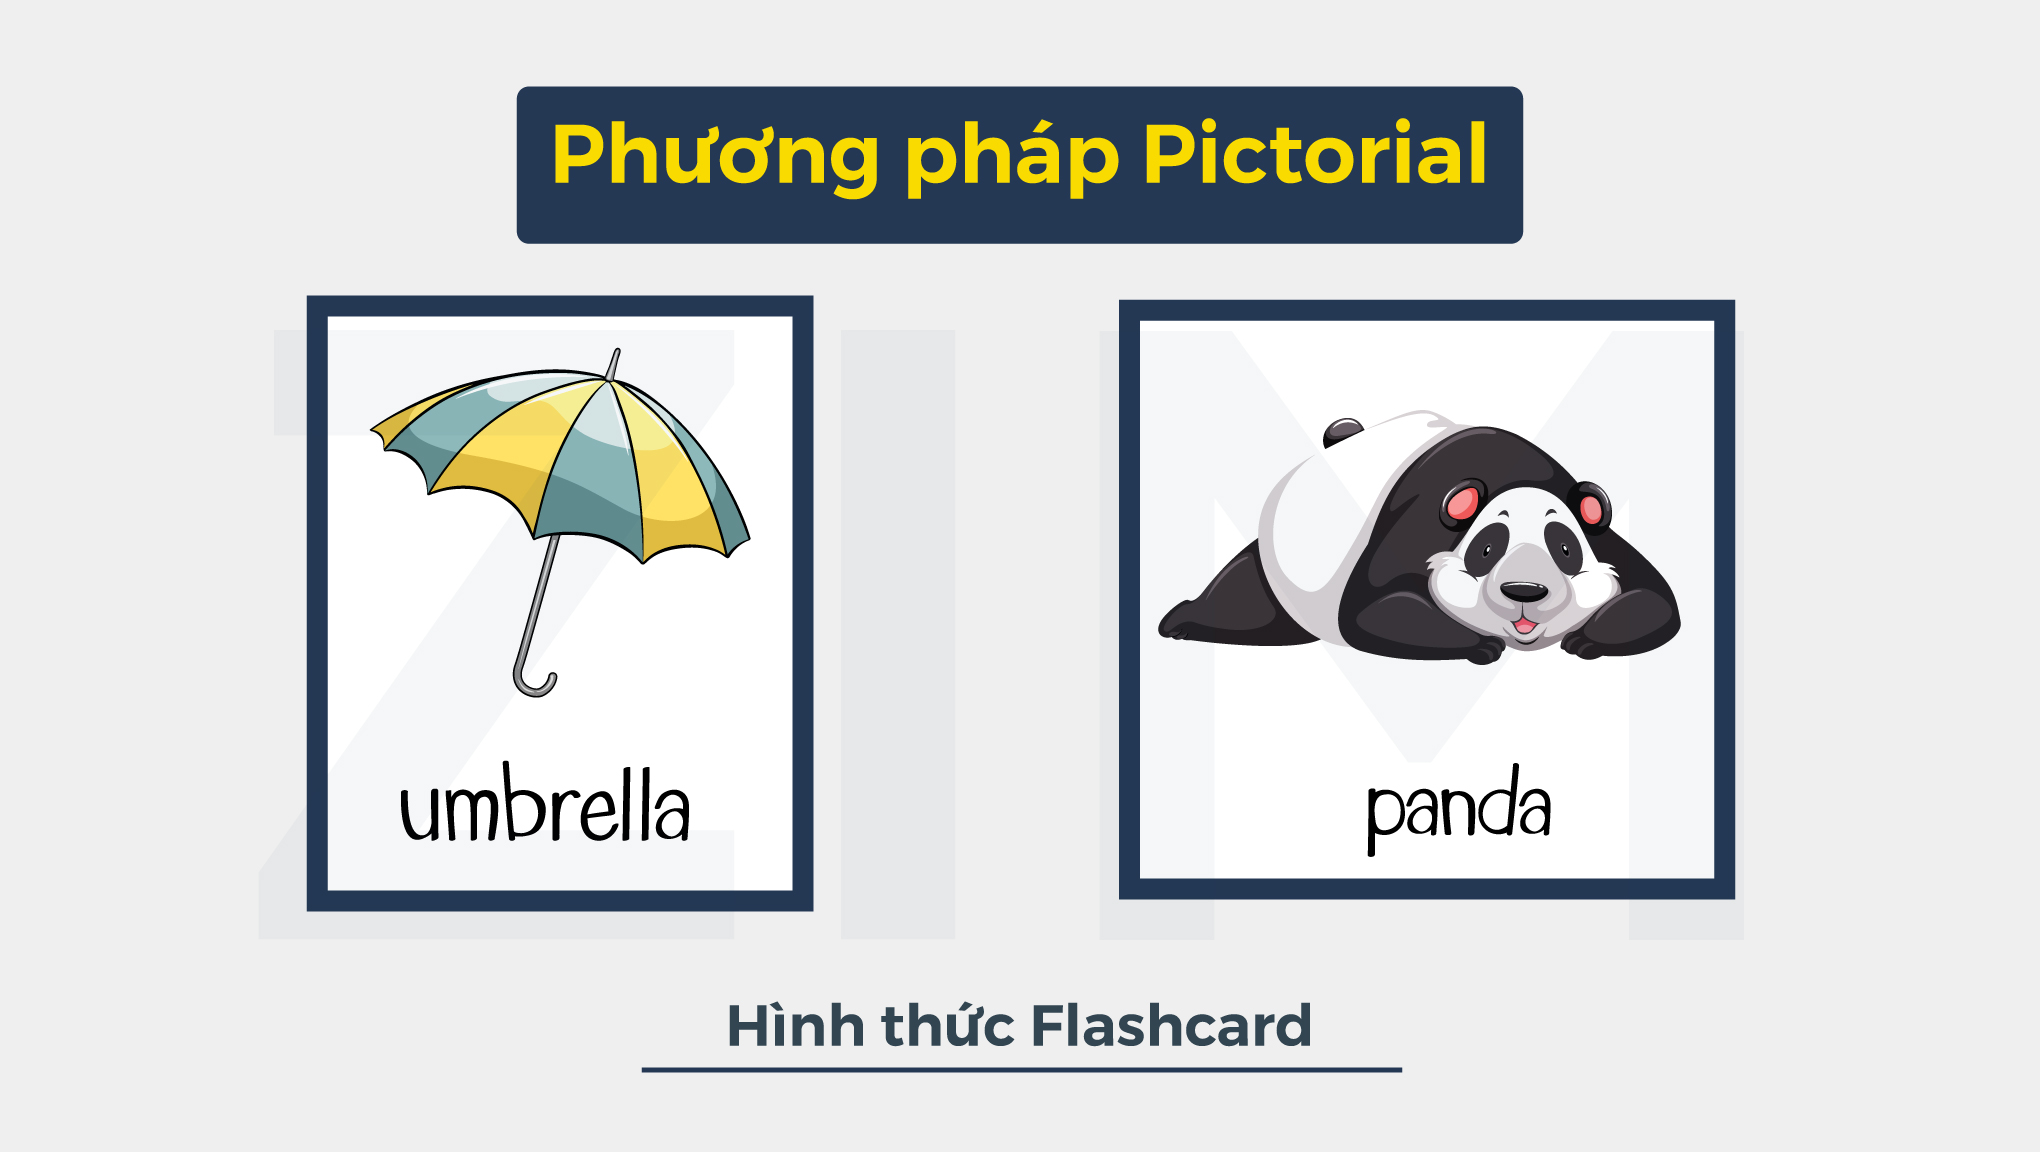 ung-dung-phuong-phap-pictorial